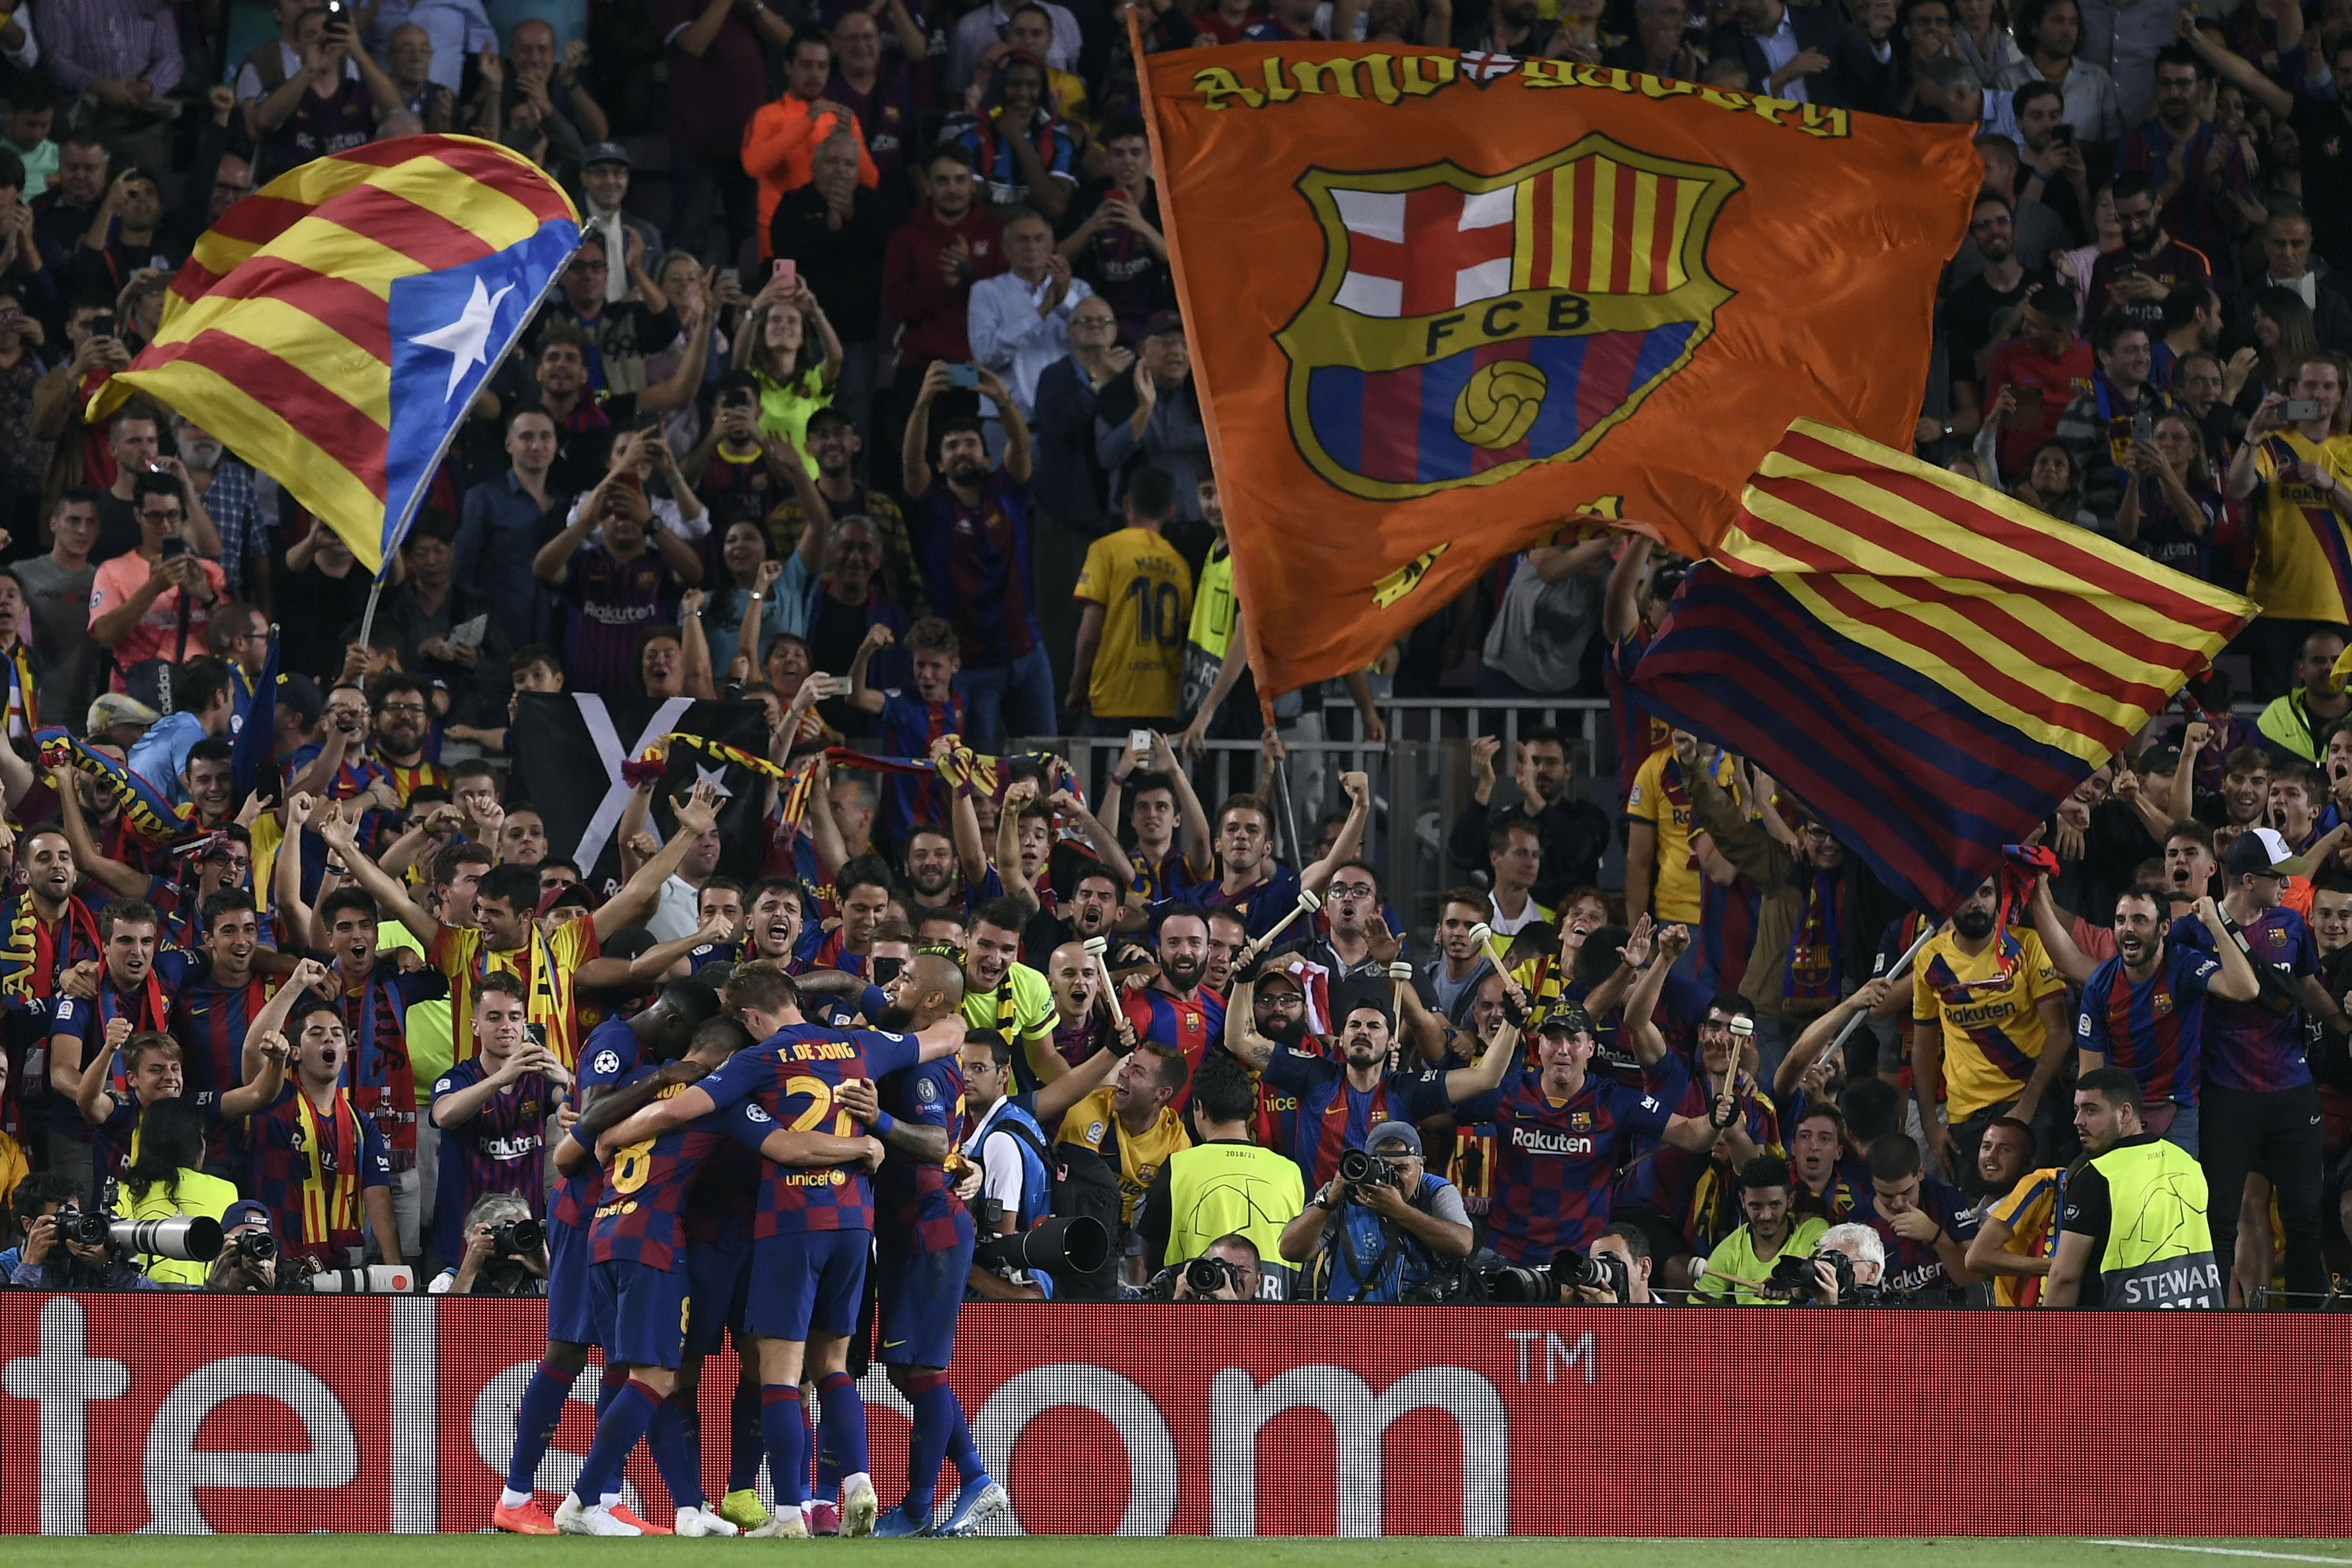 Barcelona players celebrate their second goal scored by Barcelona's Uruguayan forward Luis Suarez during the UEFA Champions League Group F football match between Barcelona and Inter Milan at the Camp Nou stadium in Barcelona, on October 2, 2019. (Photo by Josep LAGO / AFP) (Photo by JOSEP LAGO/AFP via Getty Images)